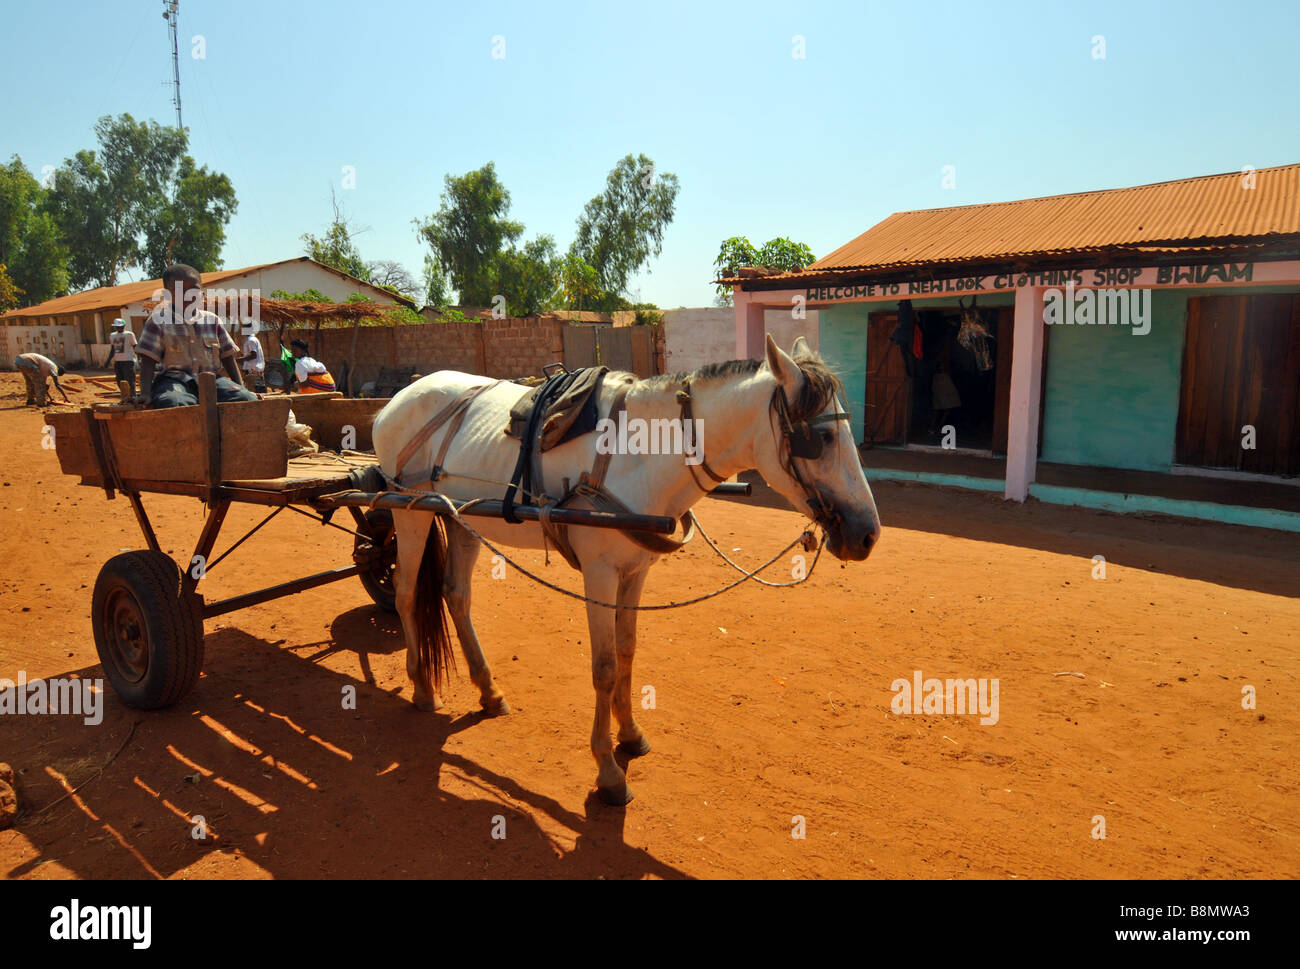 Horse and cart outside 'New Look' clothes shop in Bwiam, The Gambia “West Africa” Stock Photo